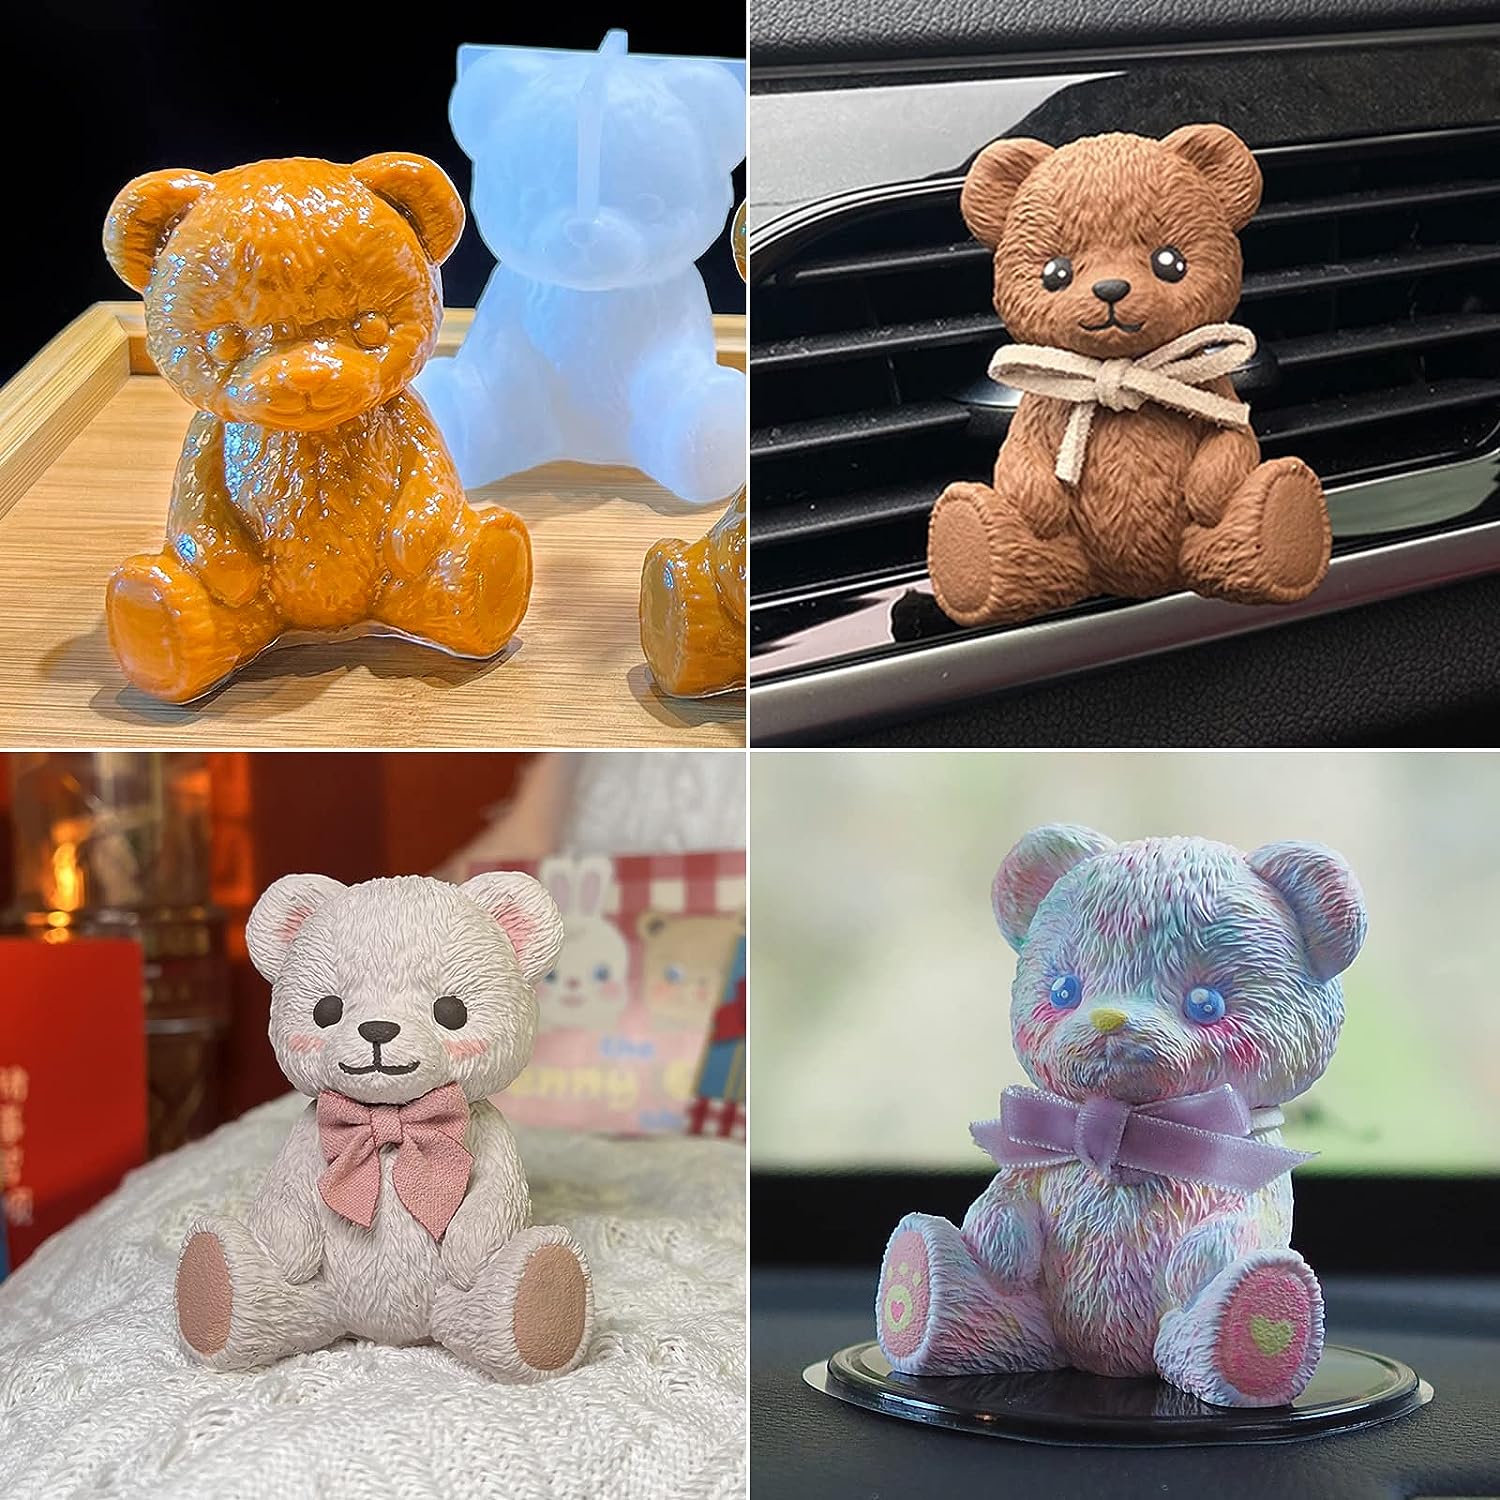 3D Cute Bear Silicone Mold Crystal Geometric Bear Mobile Phone Holder Funny  Mold Kawaii Silicone Resin Mold - Silicone Molds Wholesale & Retail -  Fondant, Soap, Candy, DIY Cake Molds